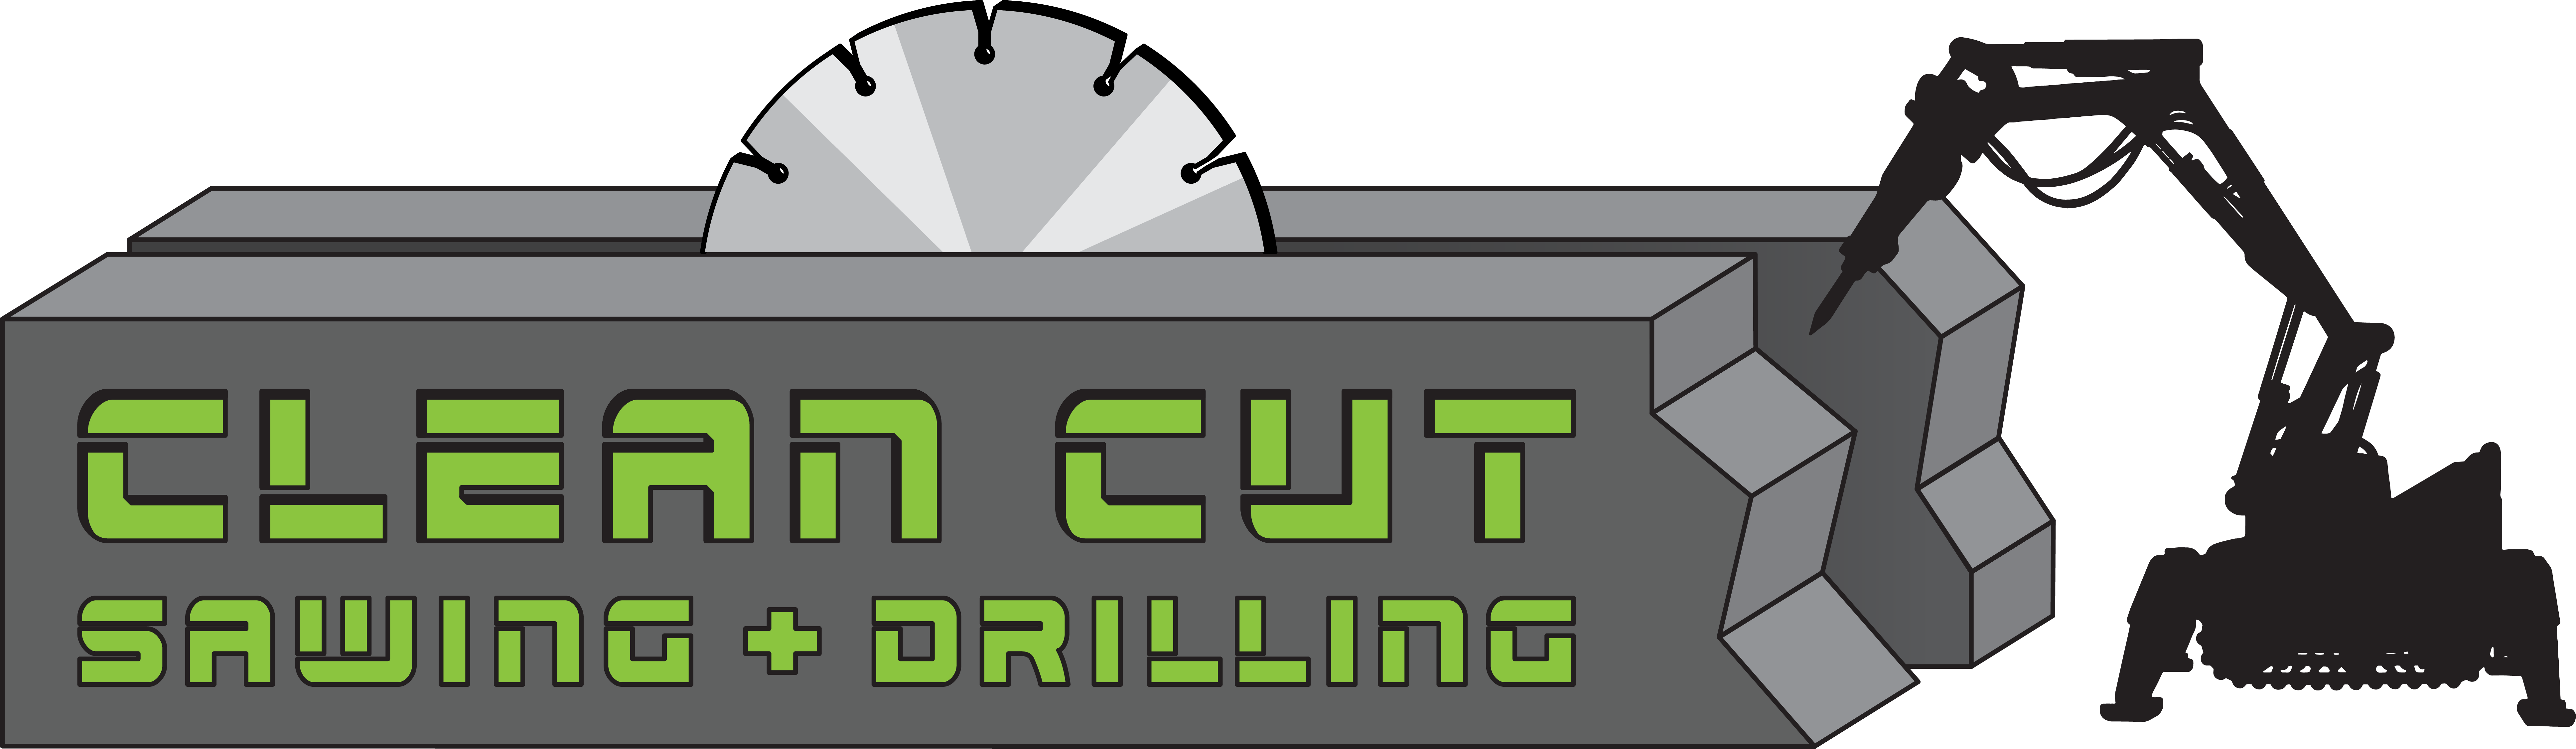 Clean Cut Sawing and Drilling logo